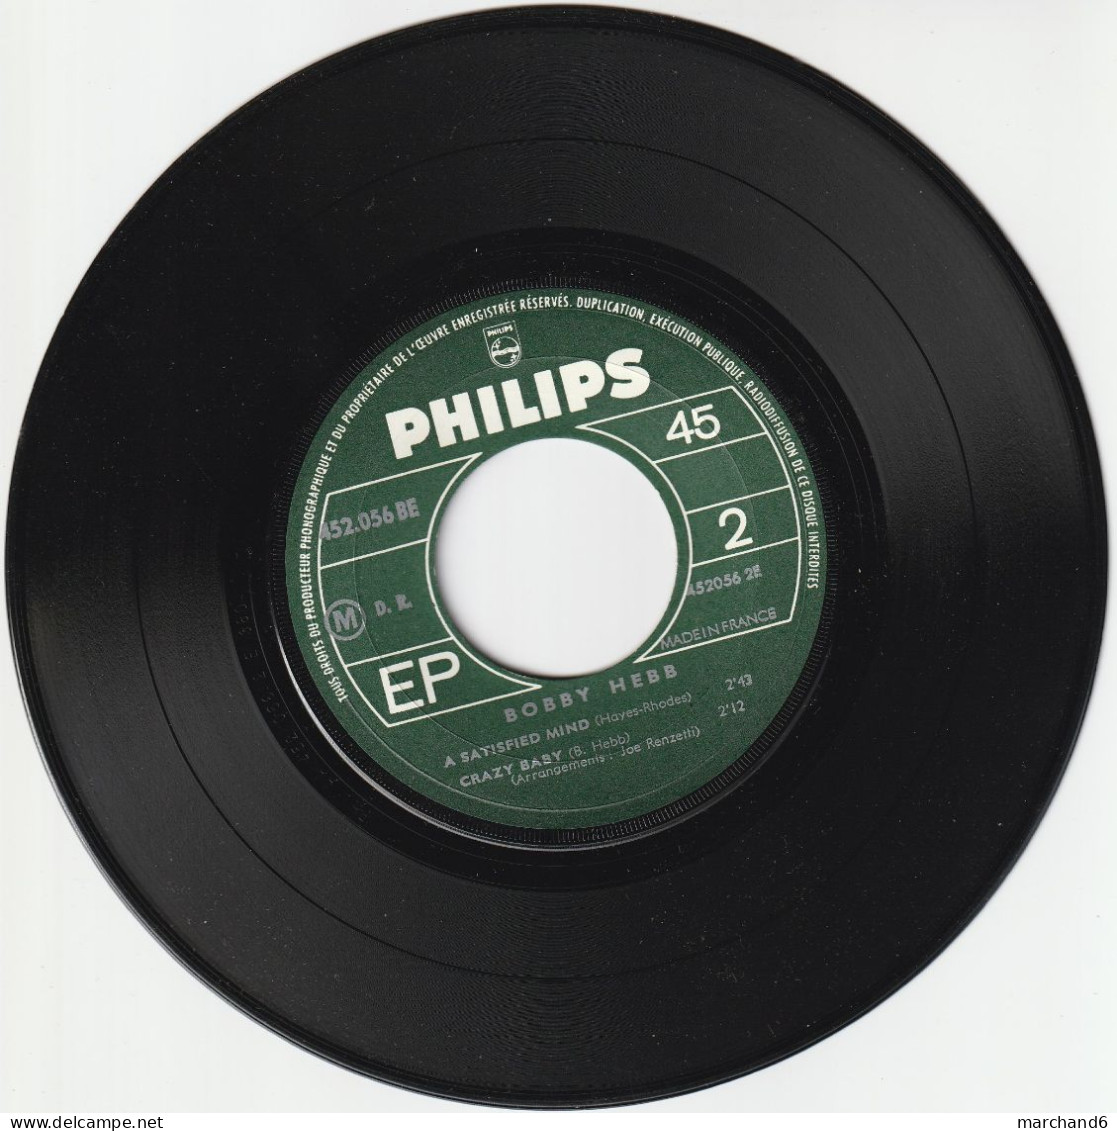 Bobby Hebb Philips 452 056 Sunny/yes Or No Or Maybe Not/a Satisfied Mind/crazy Baby - Autres - Musique Anglaise